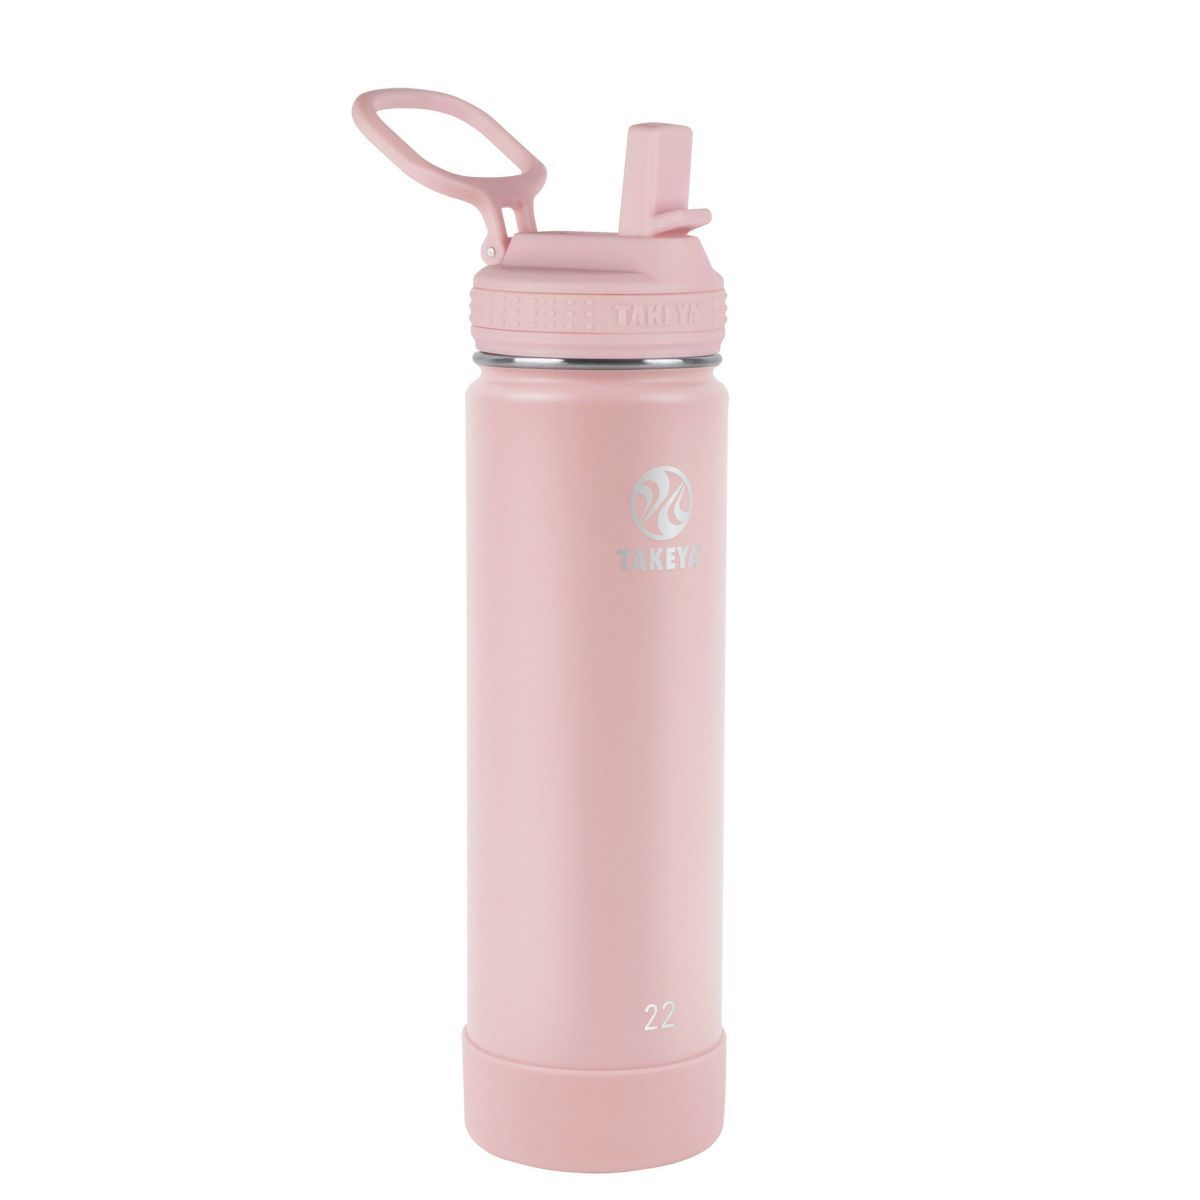 Takeya 22oz Insulated Stainless Steel Water Bottle with Straw Lid - Blush | Target